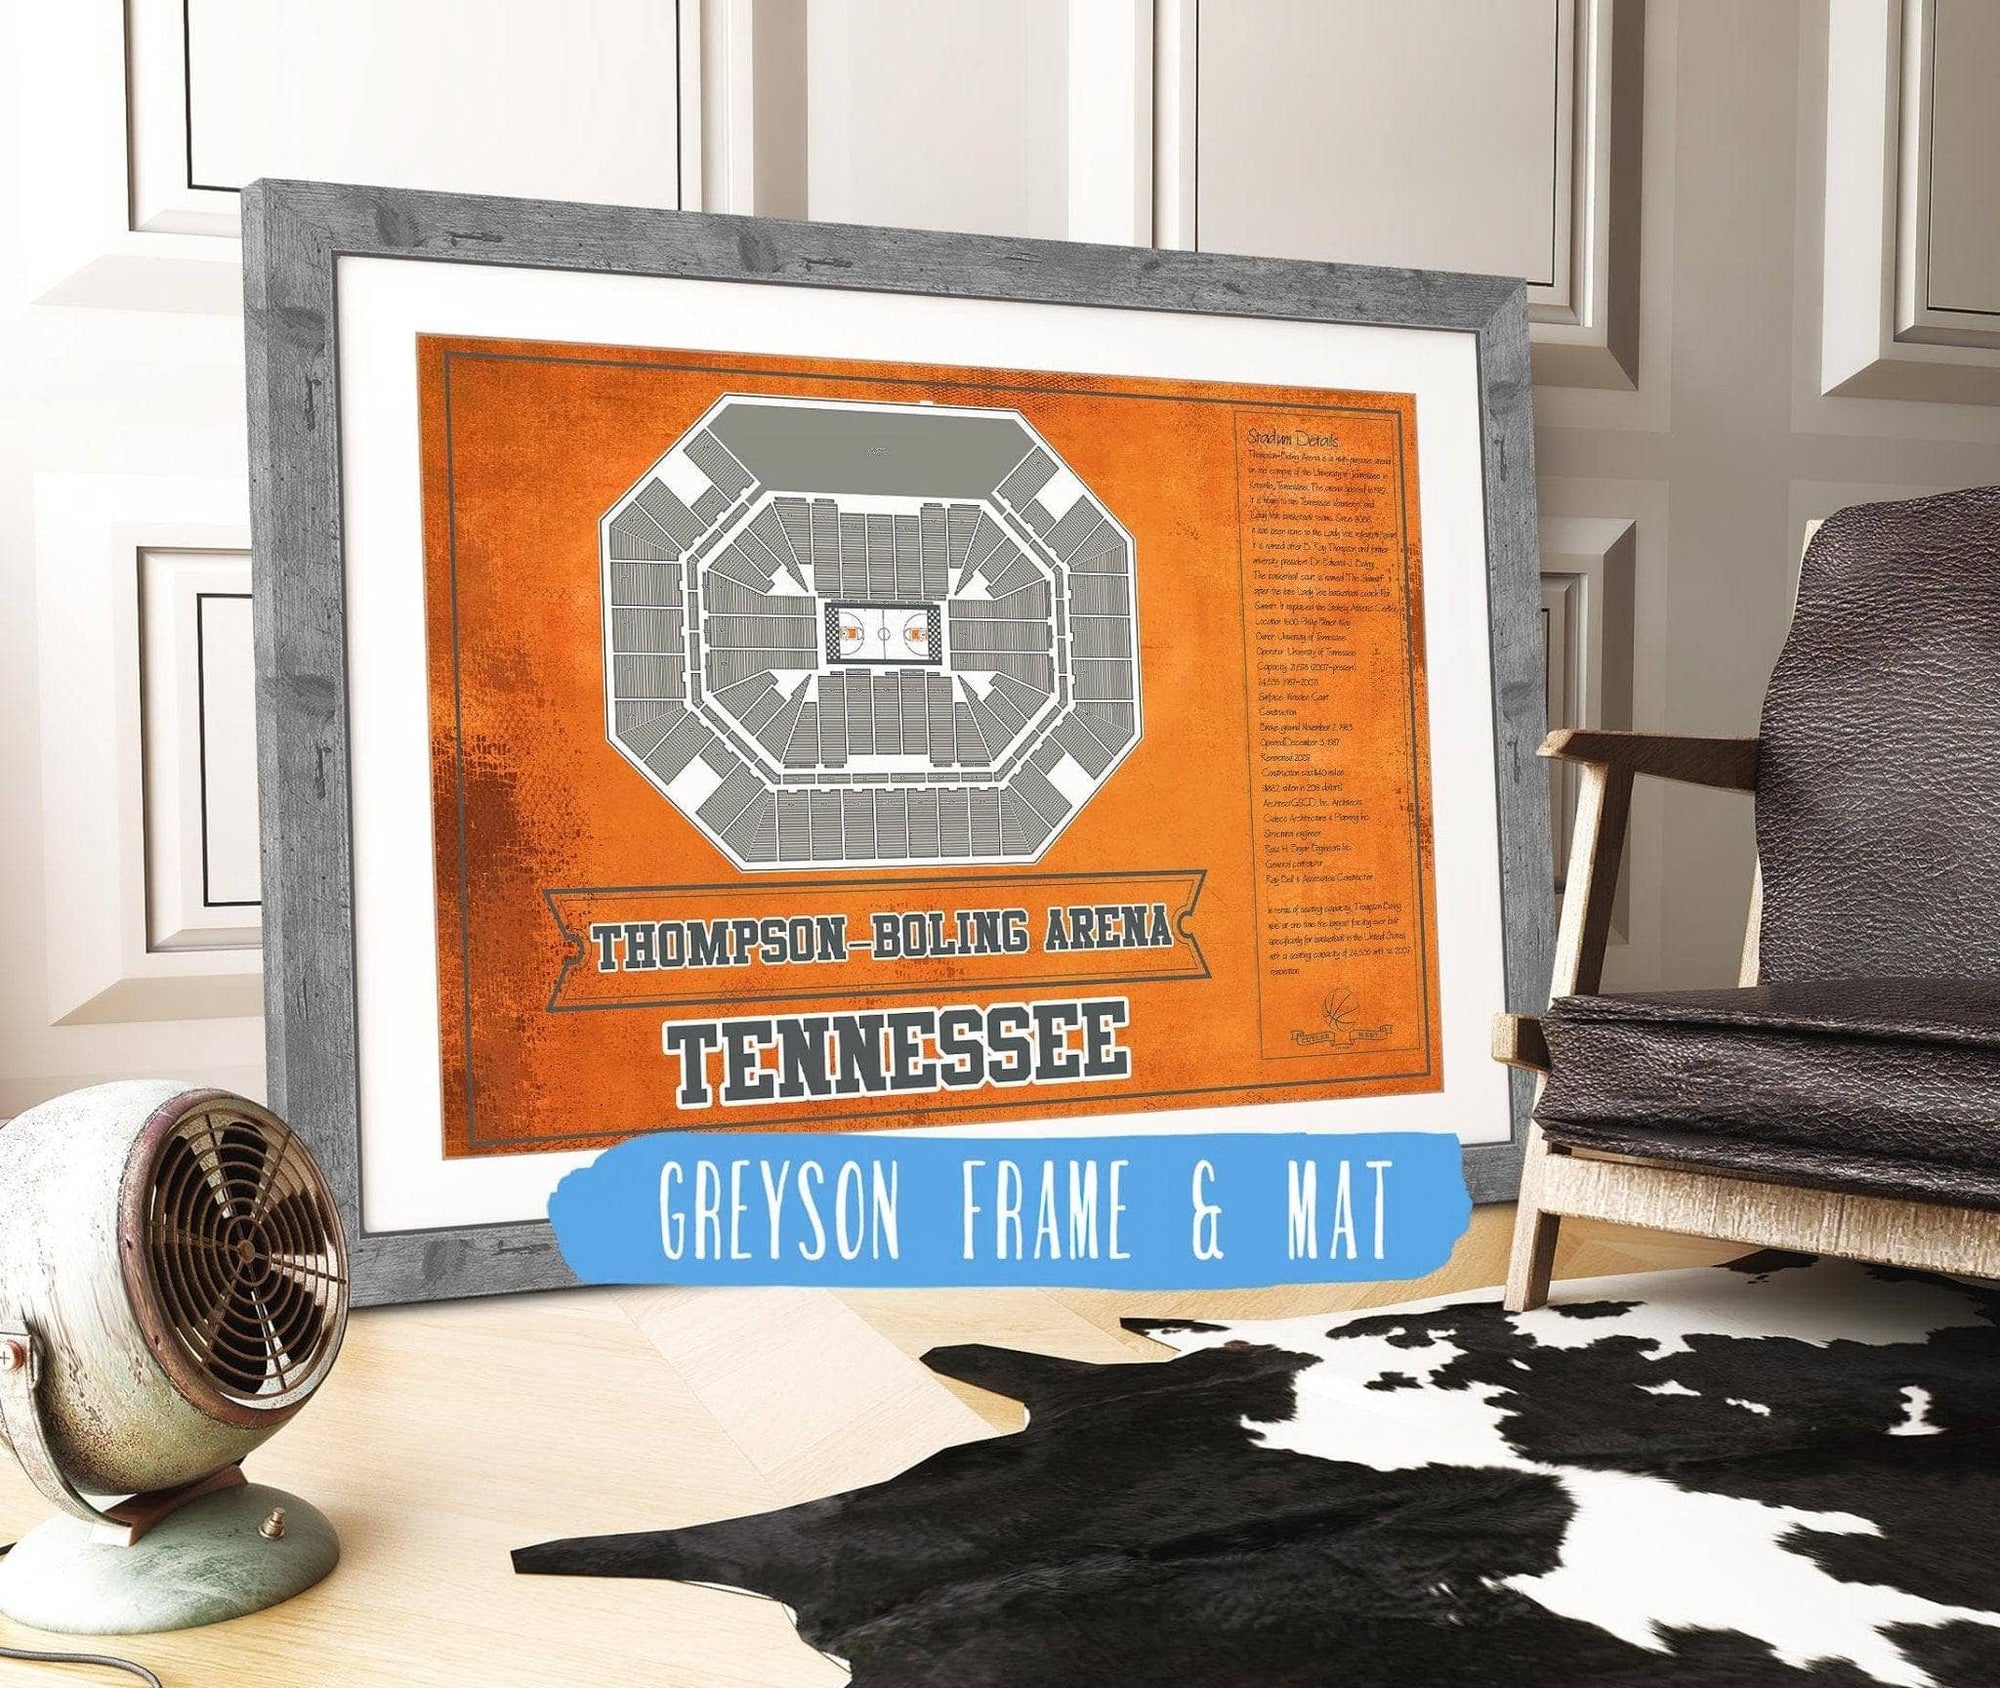 Cutler West Basketball Collection 14" x 11" / Greyson Frame & Mat Thompson–Boling Arena - Tennessee Volunteers, Lady Vols NCAA College Basketball Blueprint Art 93335021484754